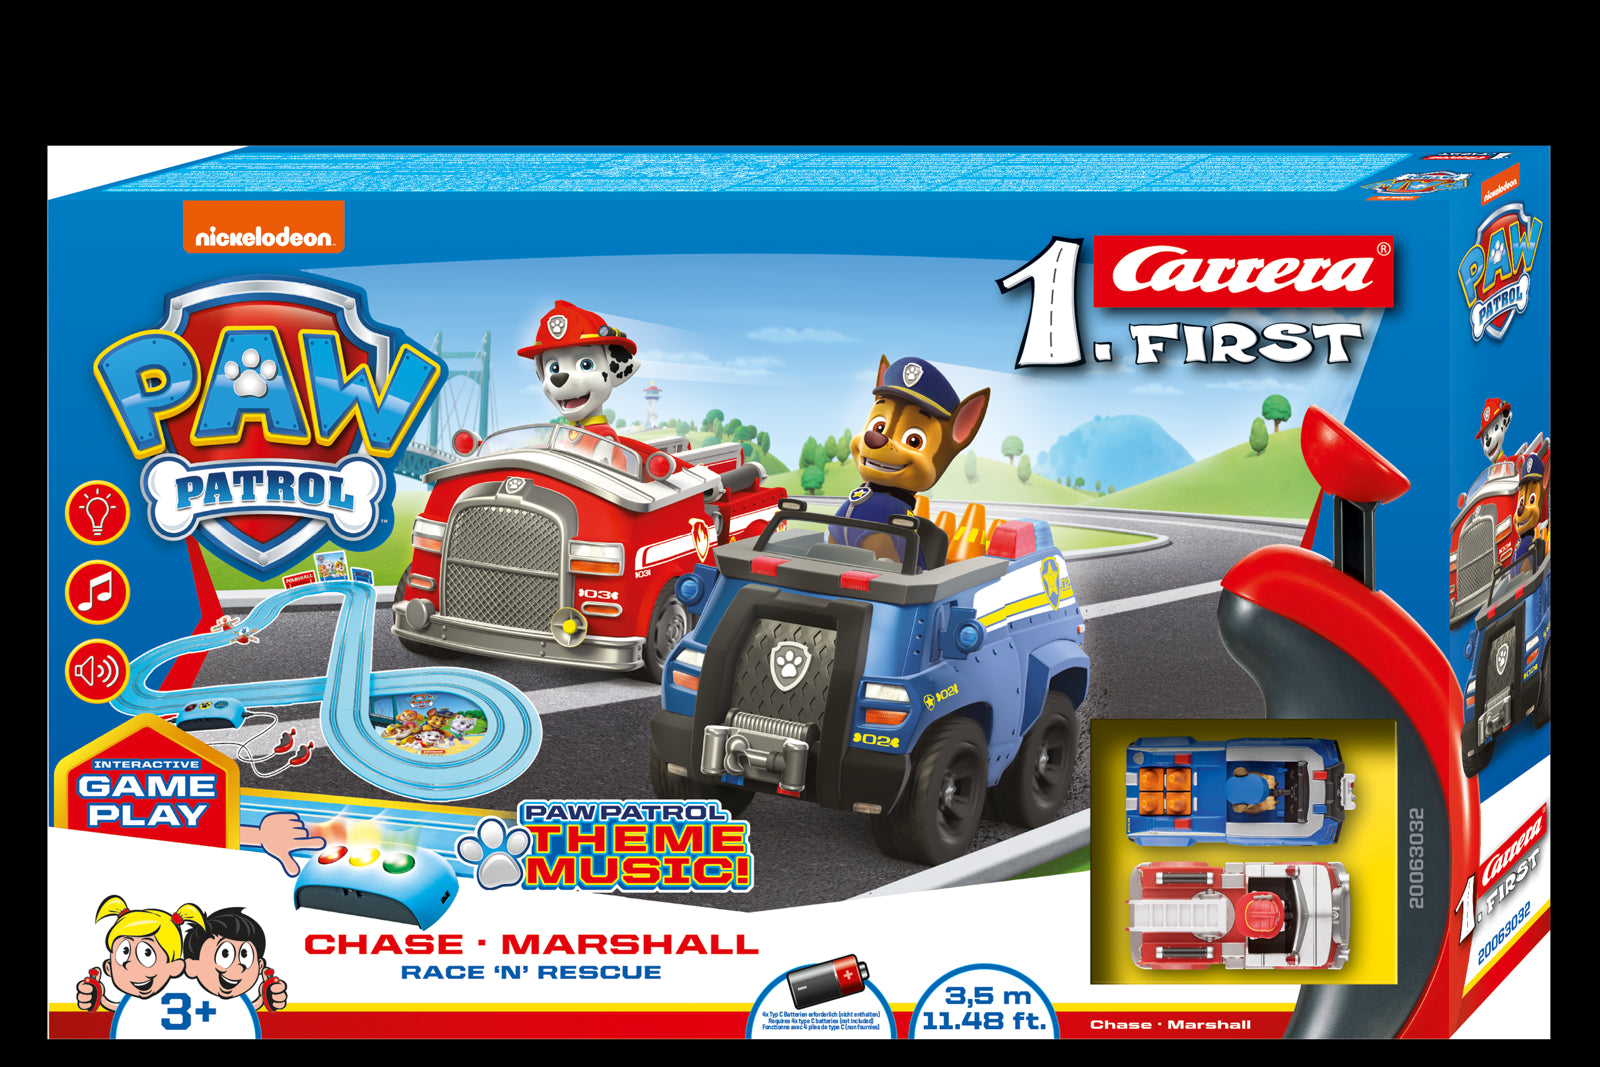 Circuit de voiture Carrera First : Pat' Patrouille (Paw Patrol) Ready for  Action